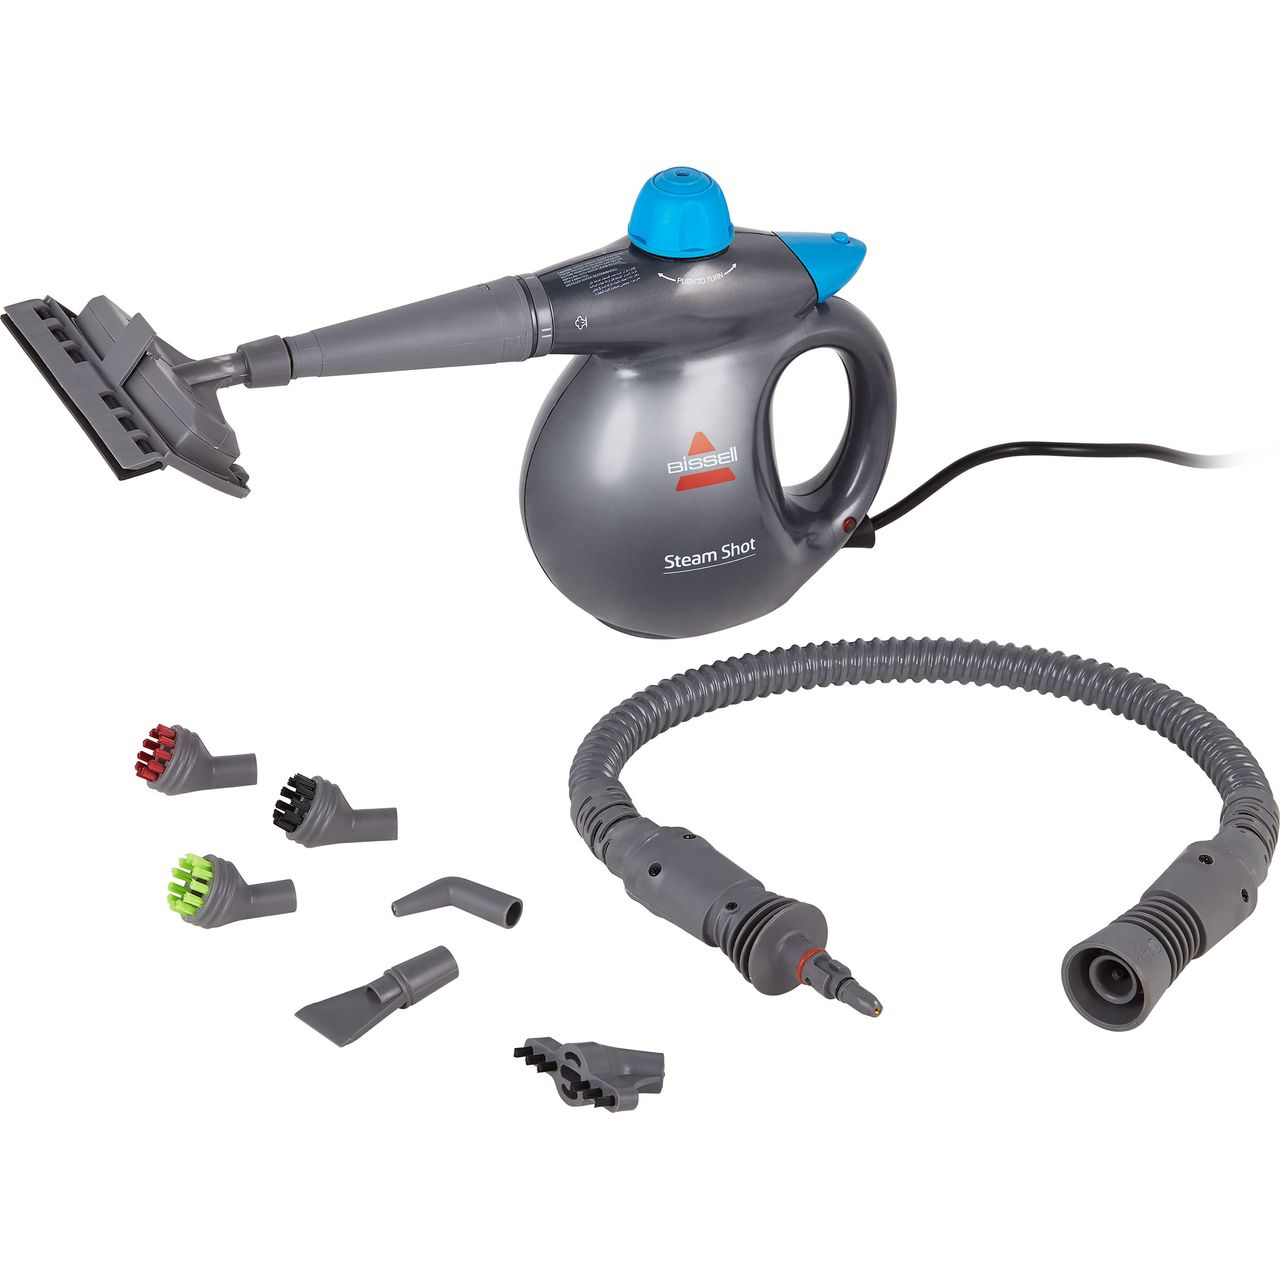 Bissell Steam Shot 2635E Steam Cleaner Review